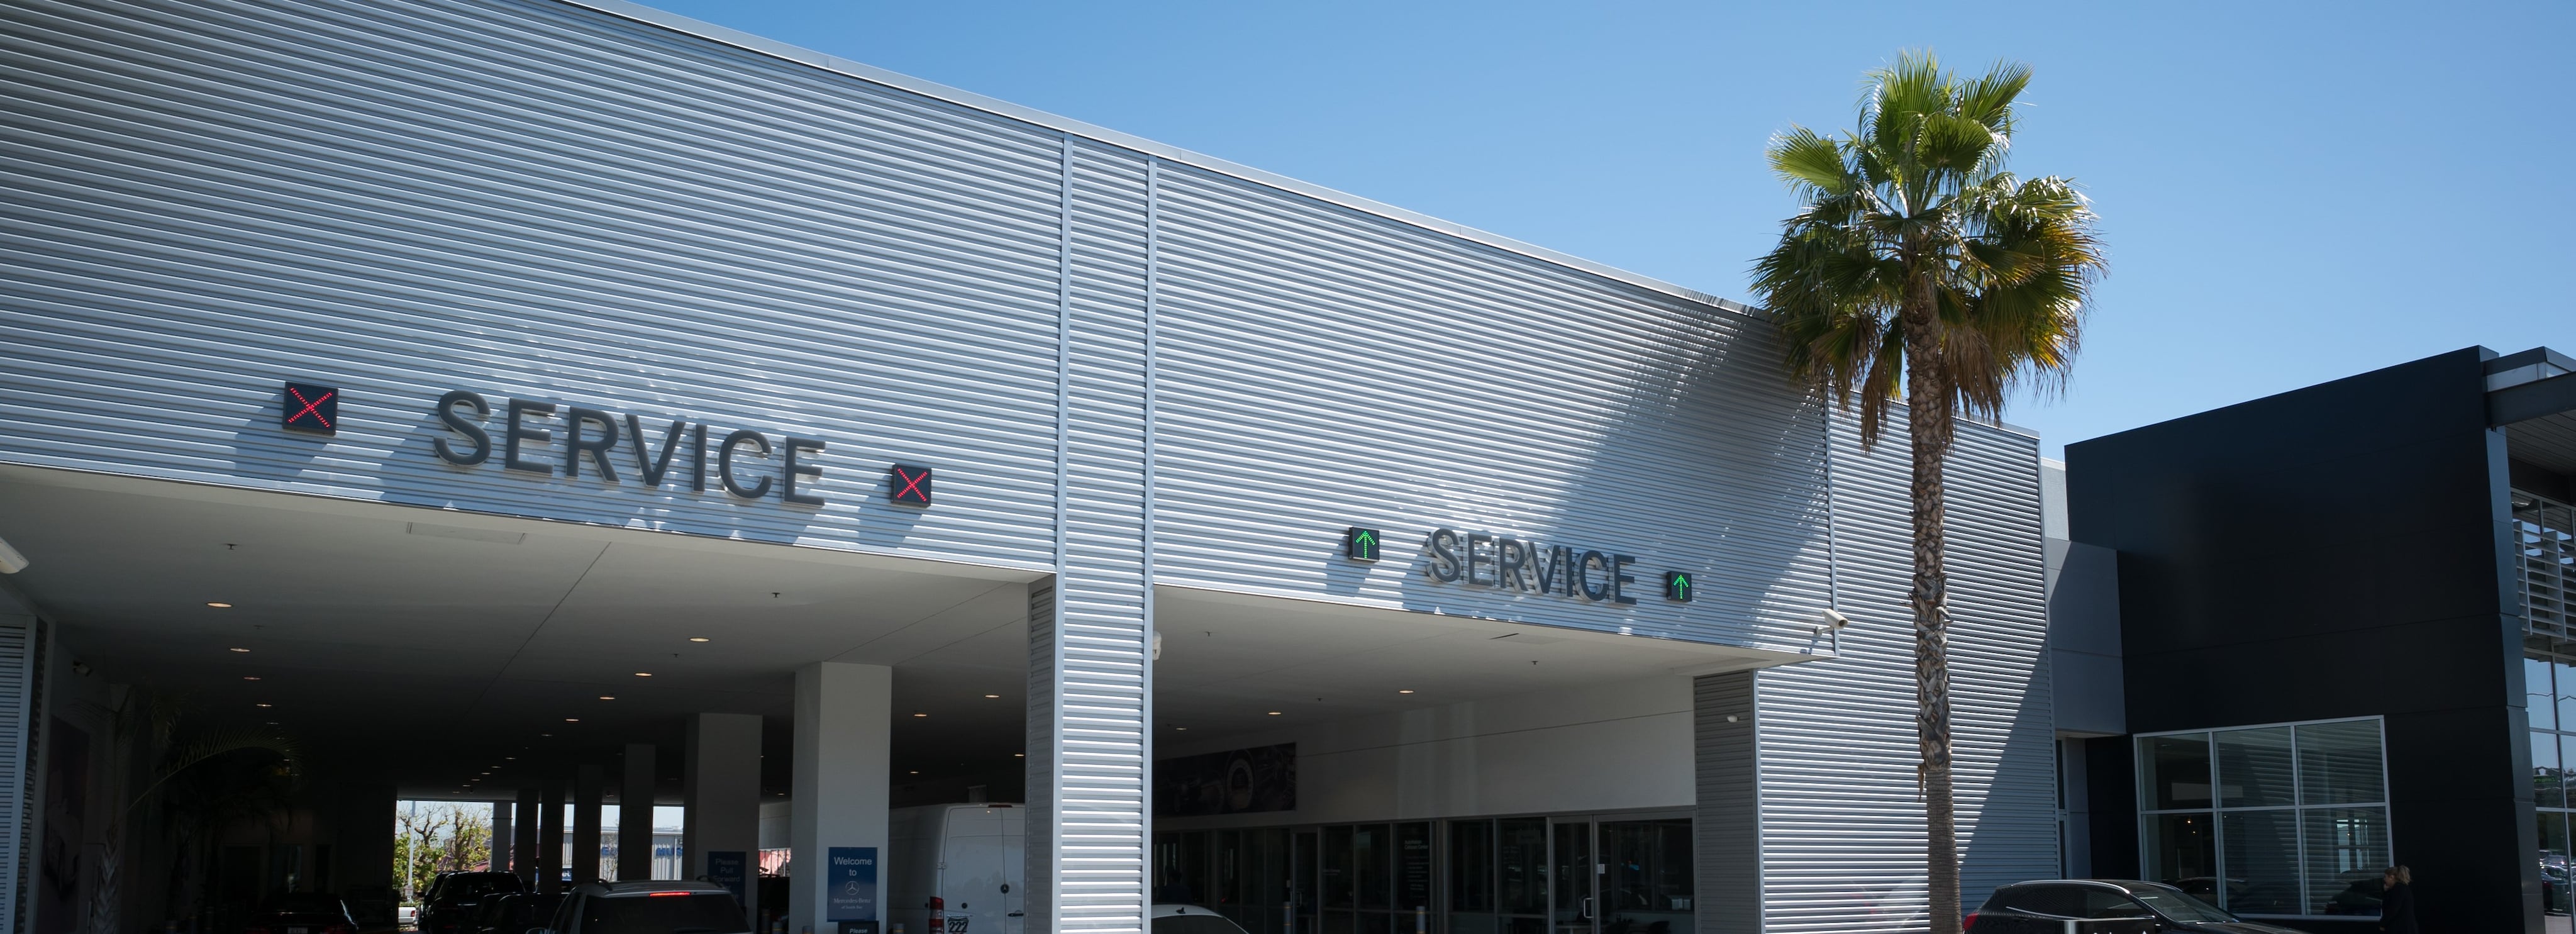 Mercedes-Benz Service Near Me In Torrance, CA | Mercedes-Benz of South Bay